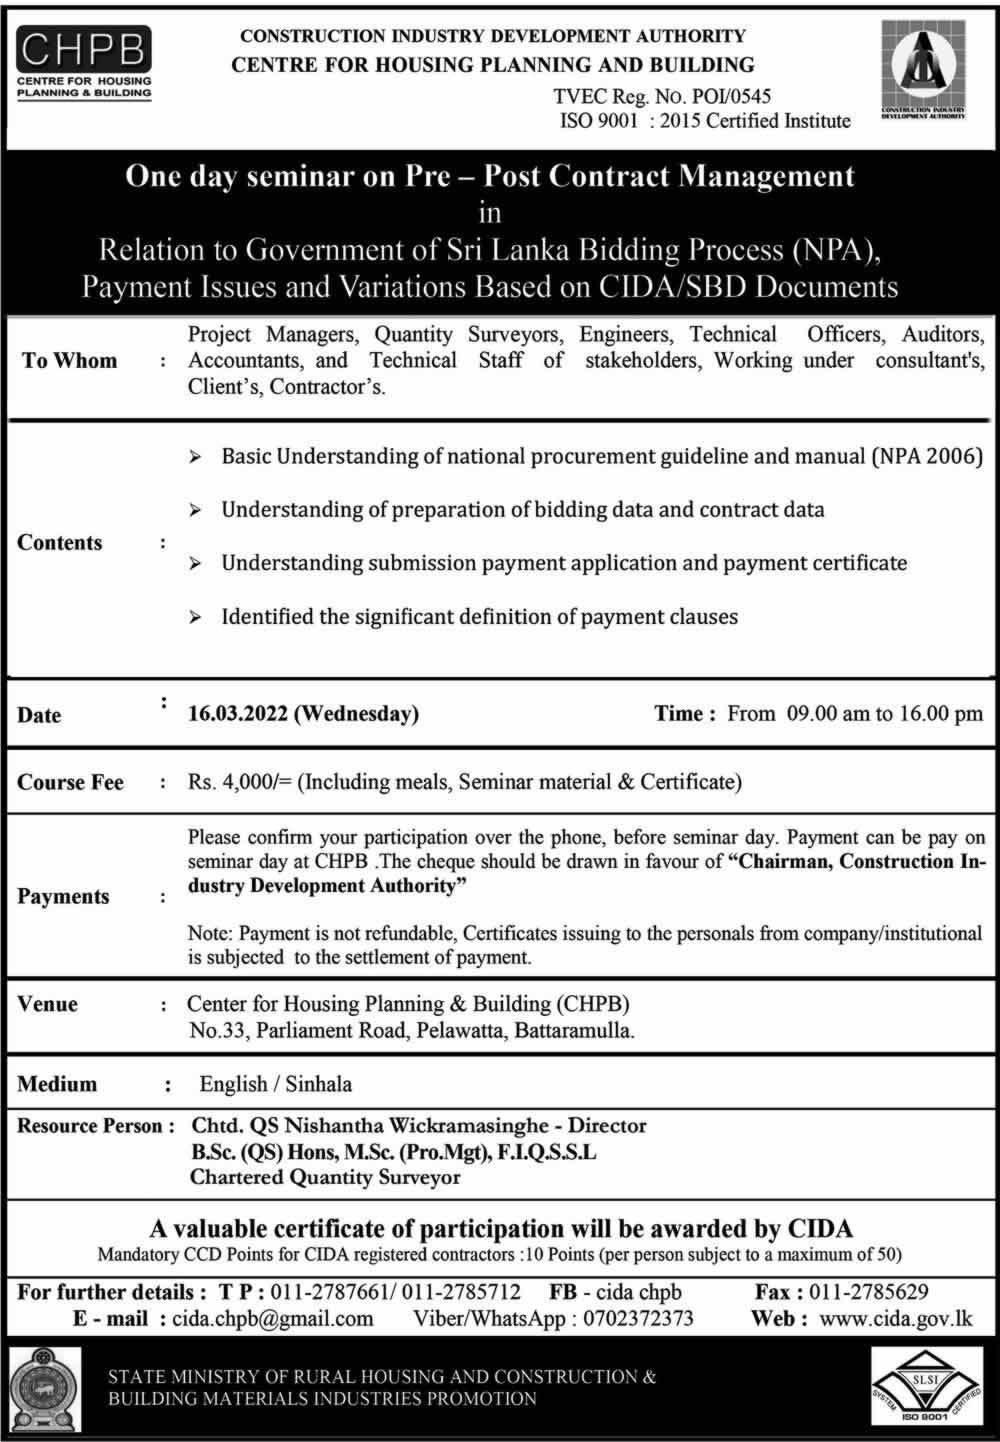 One day seminar on Pre – Post Contract Management in Relation to Government of Sri Lanka Bidding Process (NPA), Payment Issues and Variations Based on CIDA/SBD Documents